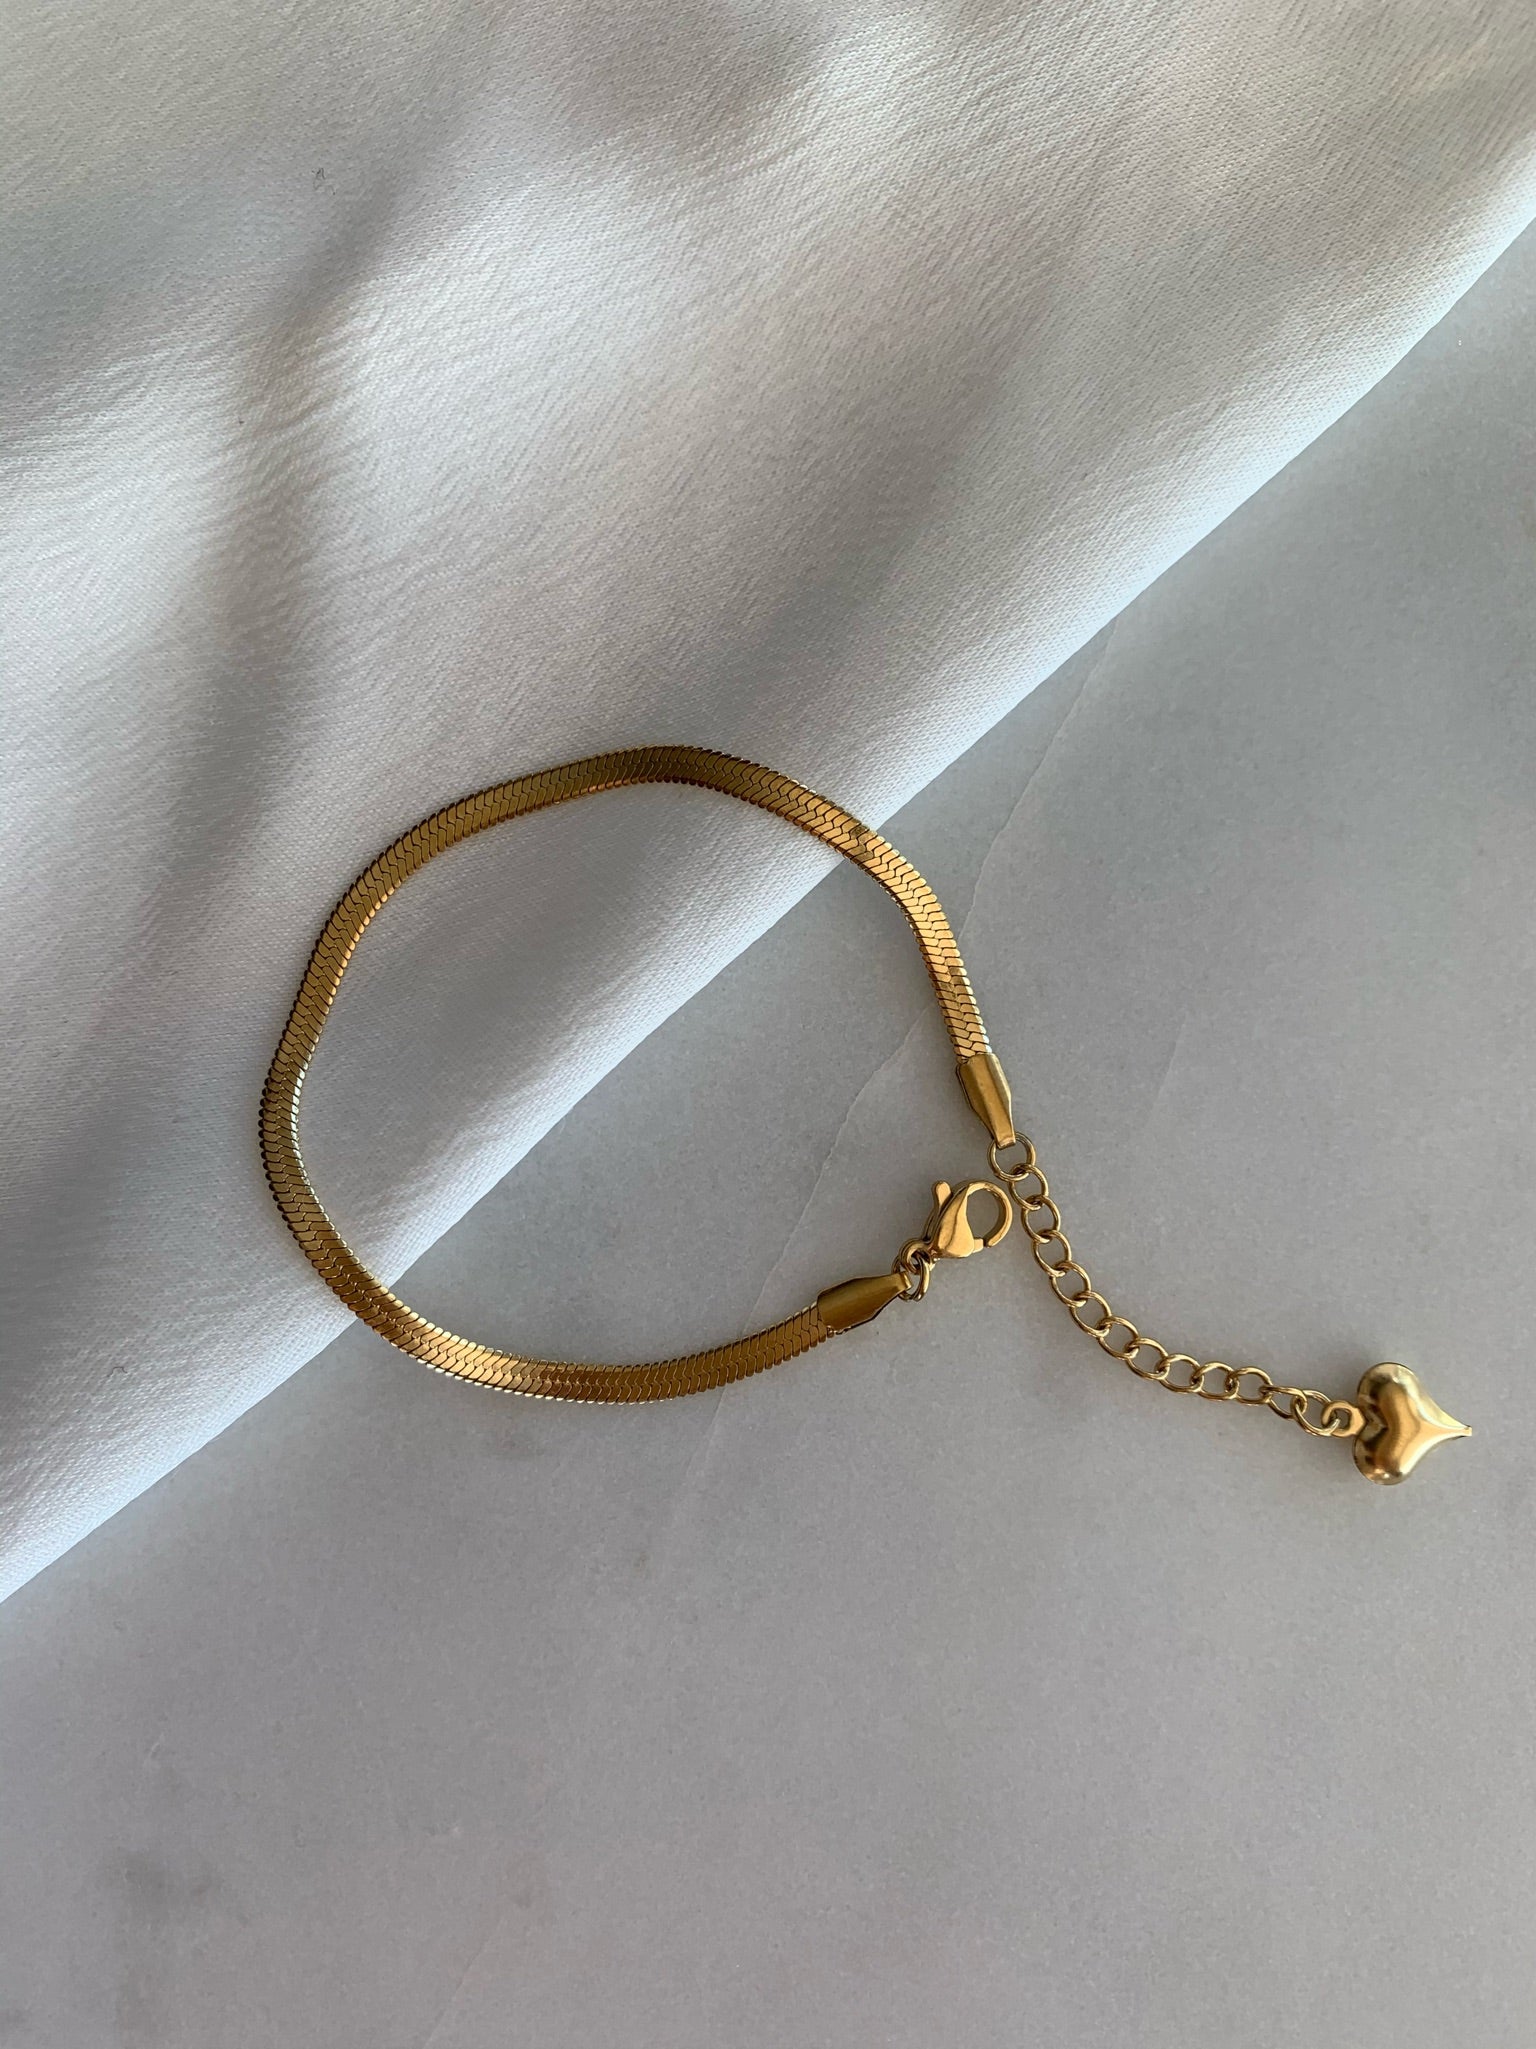 Chic and simple, it should already be on your wrist! gold plated stainless steel water resistant tarnish free 18 cm length, 3mm width adjustable heart extender attached | Easy Snake Bracelet | Non-tarnish 14k Jewellery EasyClubCo